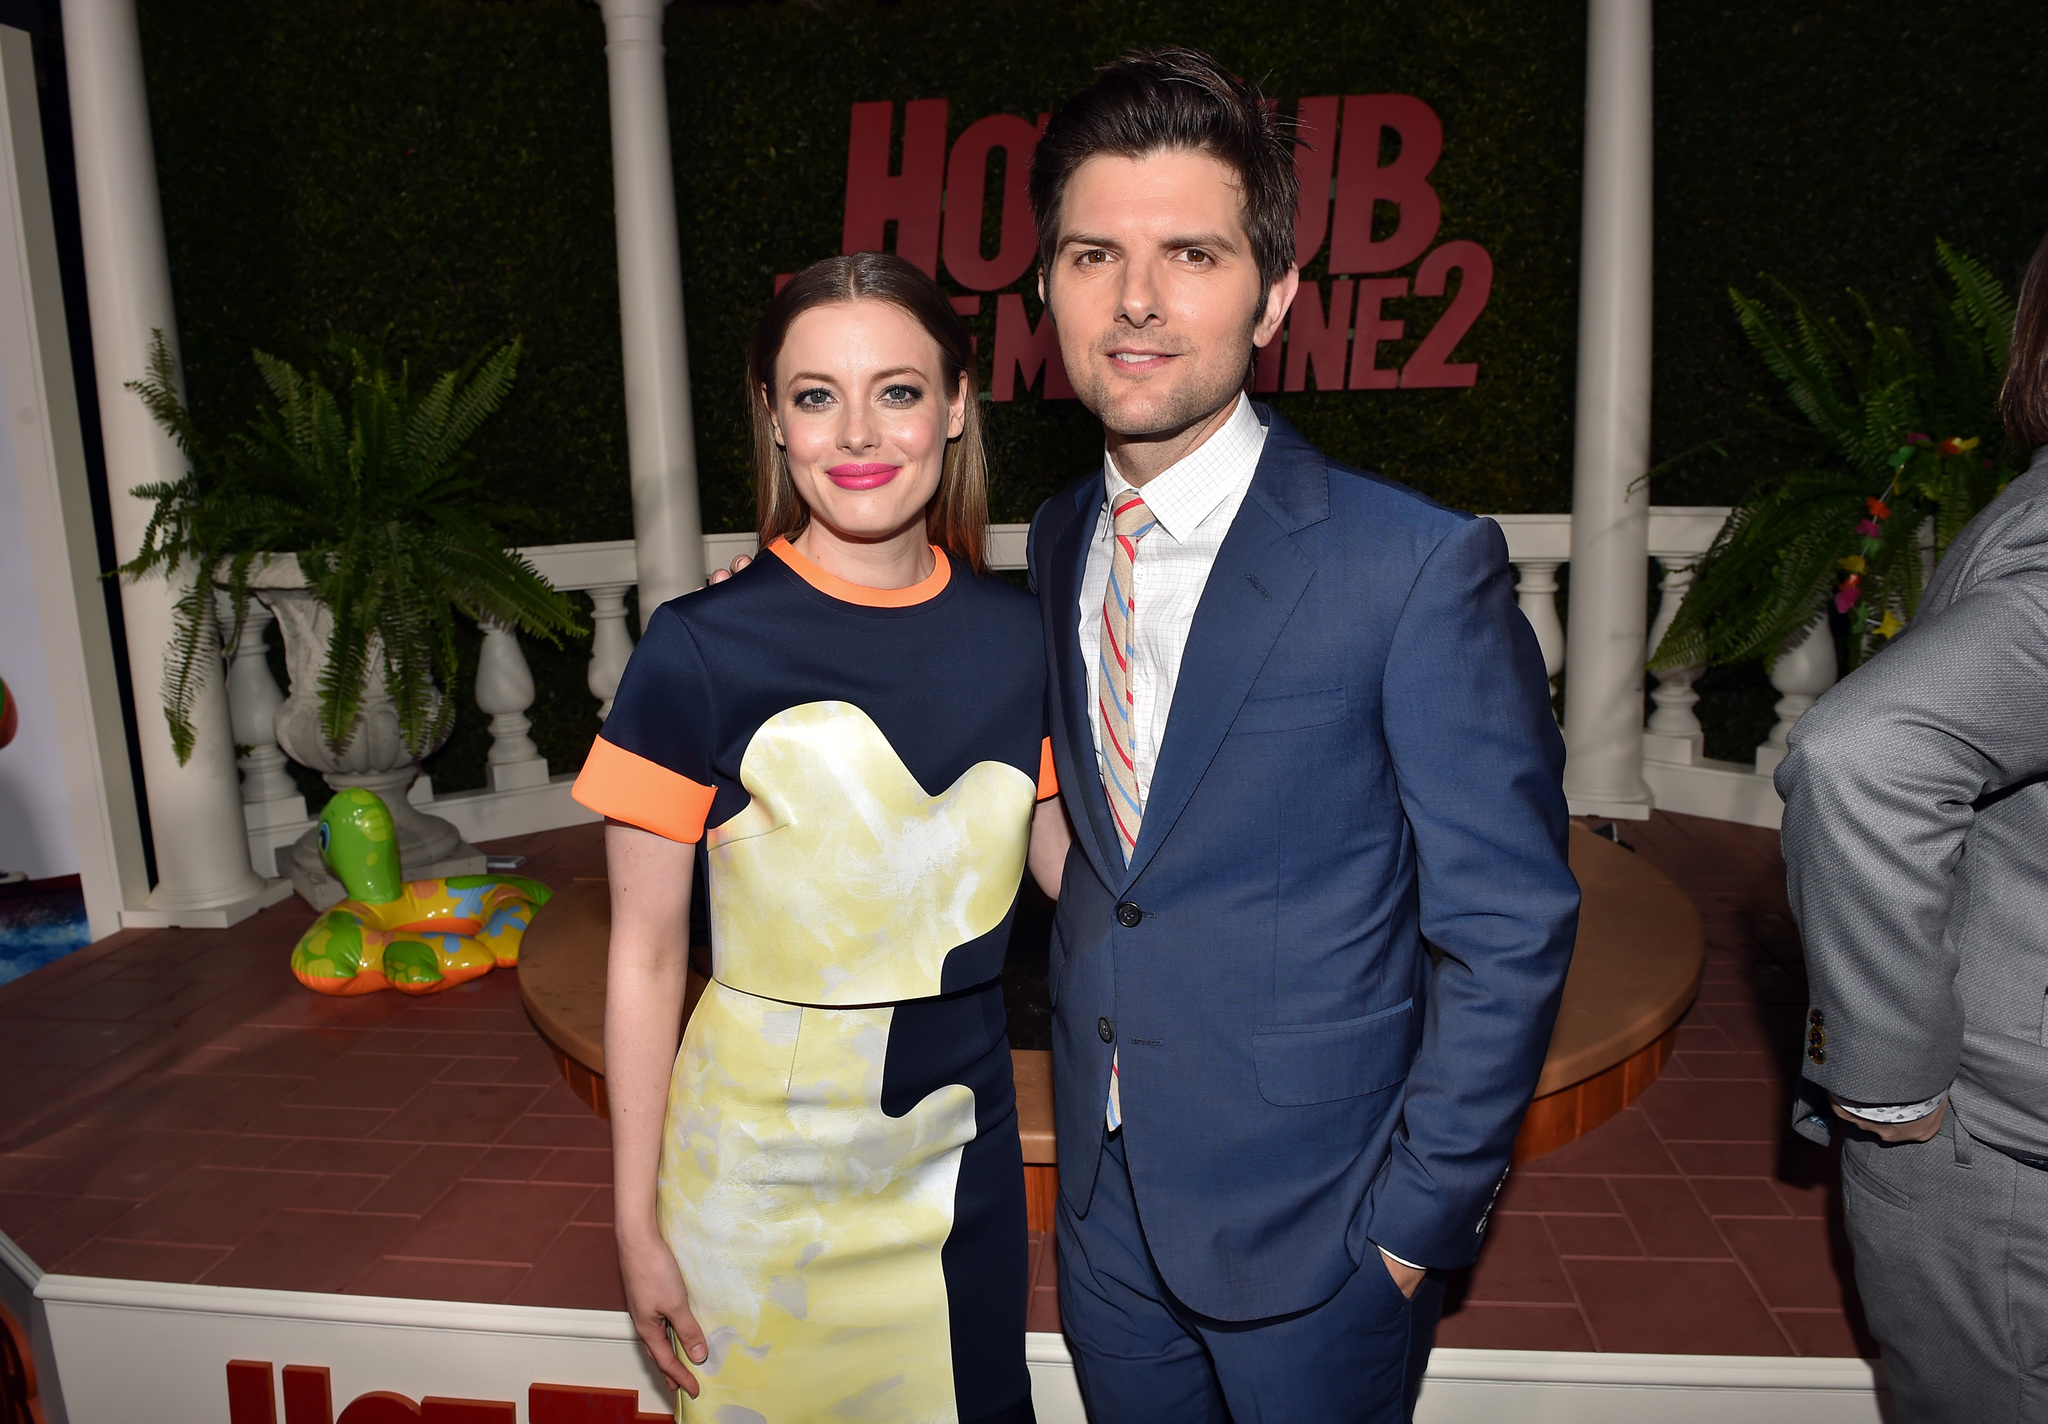 Adam Scott and Gillian Jacobs at event of Hot Tub Time Machine 2 (2015)